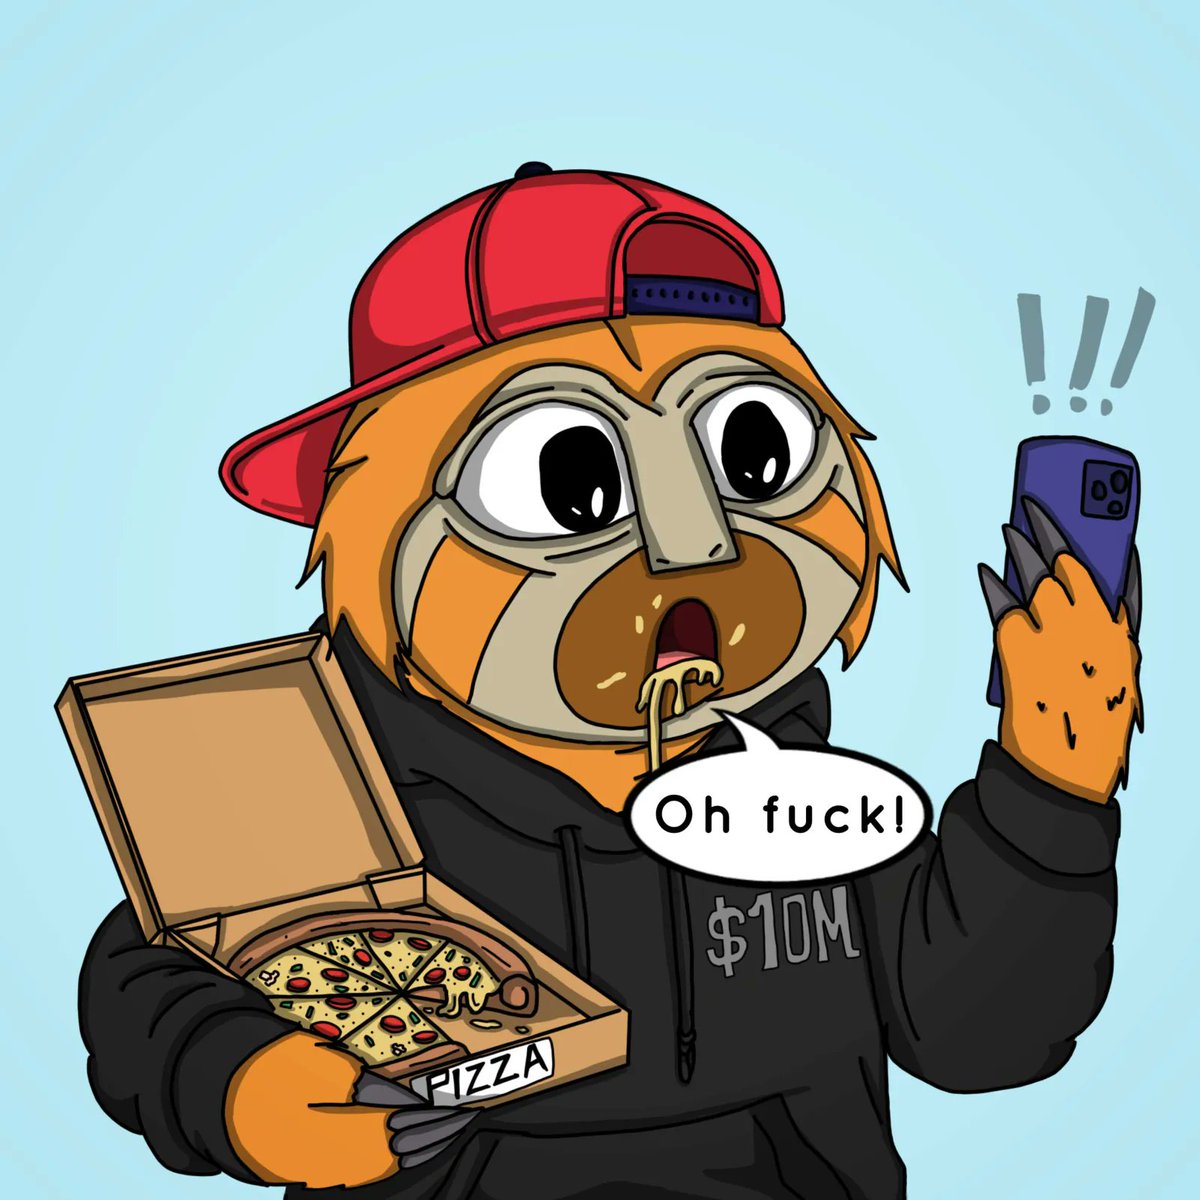 Pizza day is slerf day in the past. Not a same day,but a same situation. May the crypto world get better. Happy $btc pizza day. Let's pump this shit.$POF. OH FUCK!
pump.fun/BubBGuWY8HDEbm…